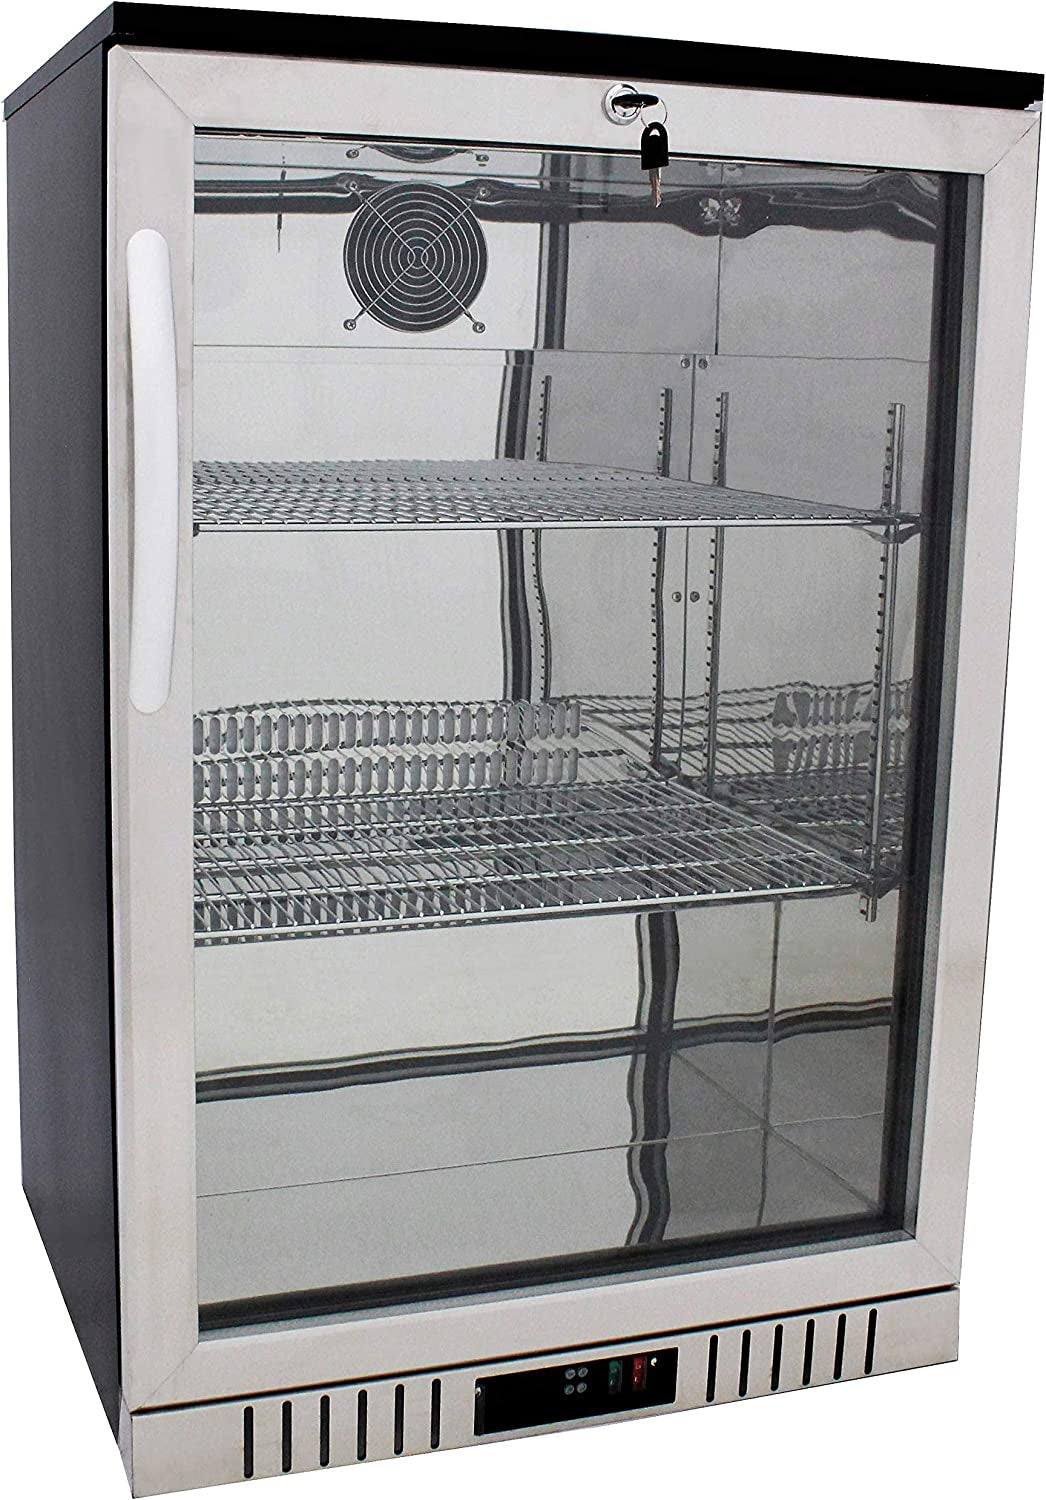 Procool Refrigeration Single Door Glass Front Stainless Steel Back Bar Cooler; 24" Wide, Counter Height Refrigerator